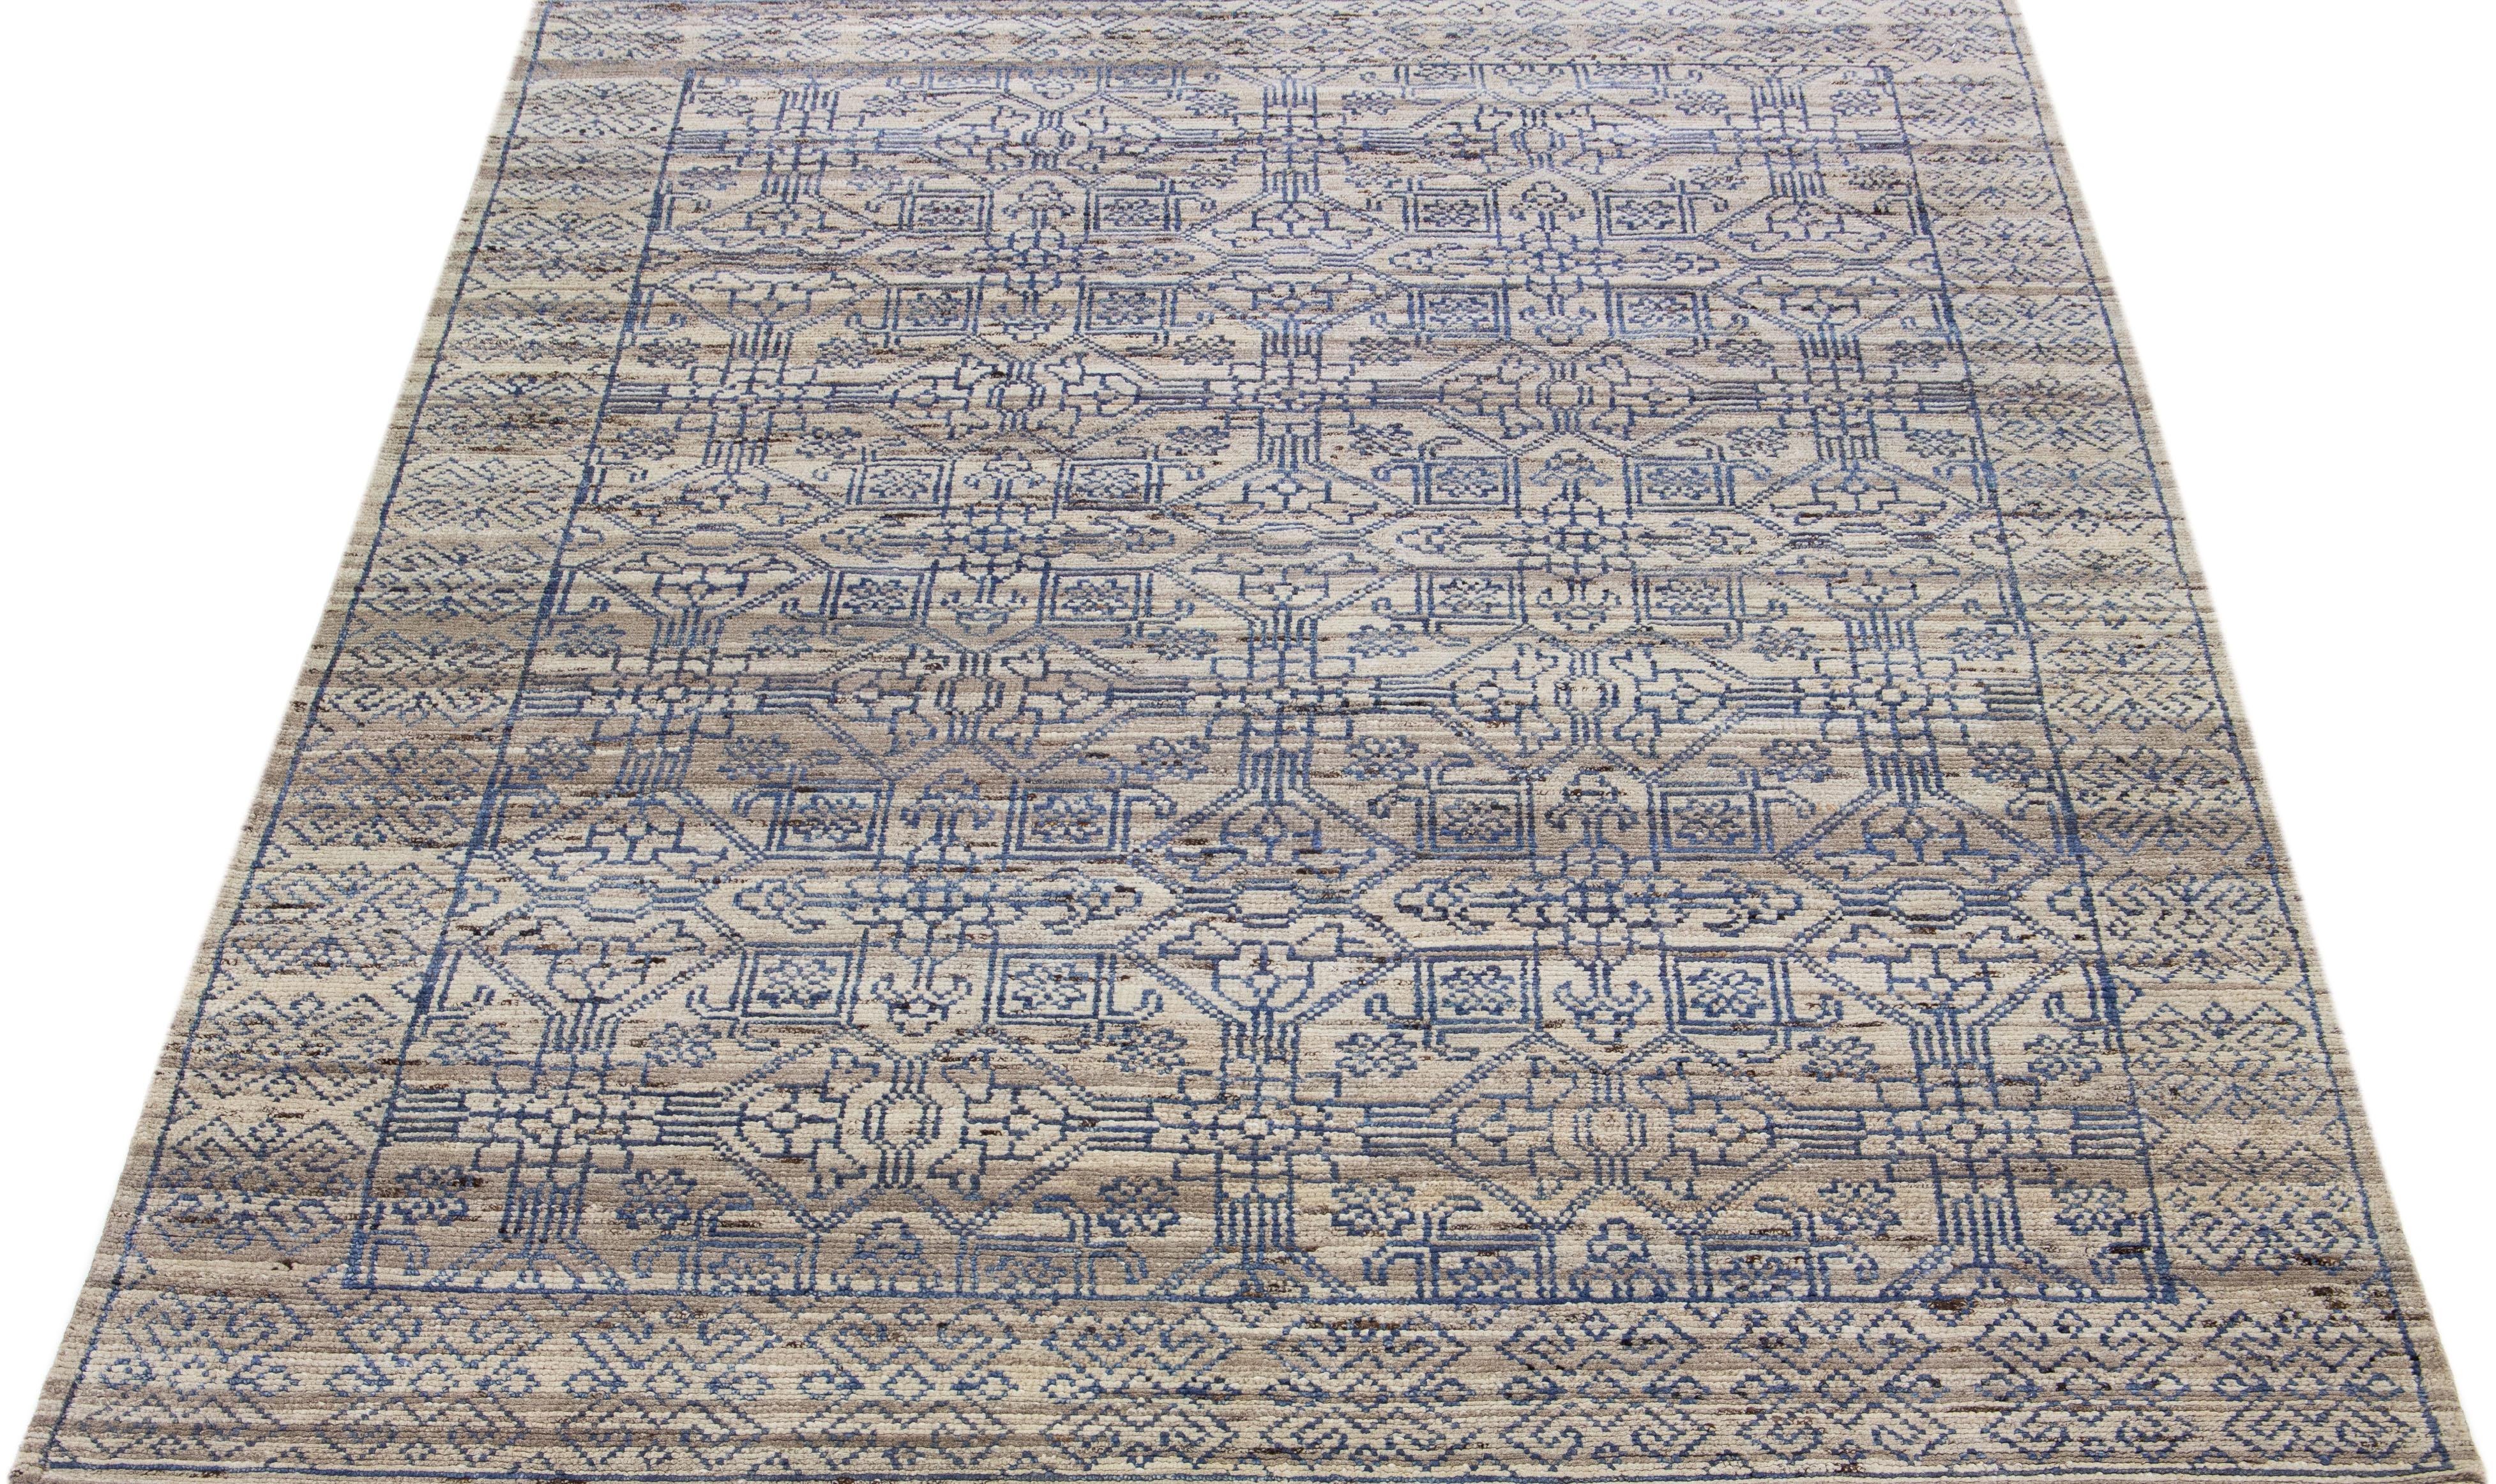 Apadana's Artisan line is an elegant way to inject a striking antique aesthetic into a space. This line of rugs is decidedly unique and reimagines what an antique rug look can be. This custom rug features a gorgeous all-over geometric design with a